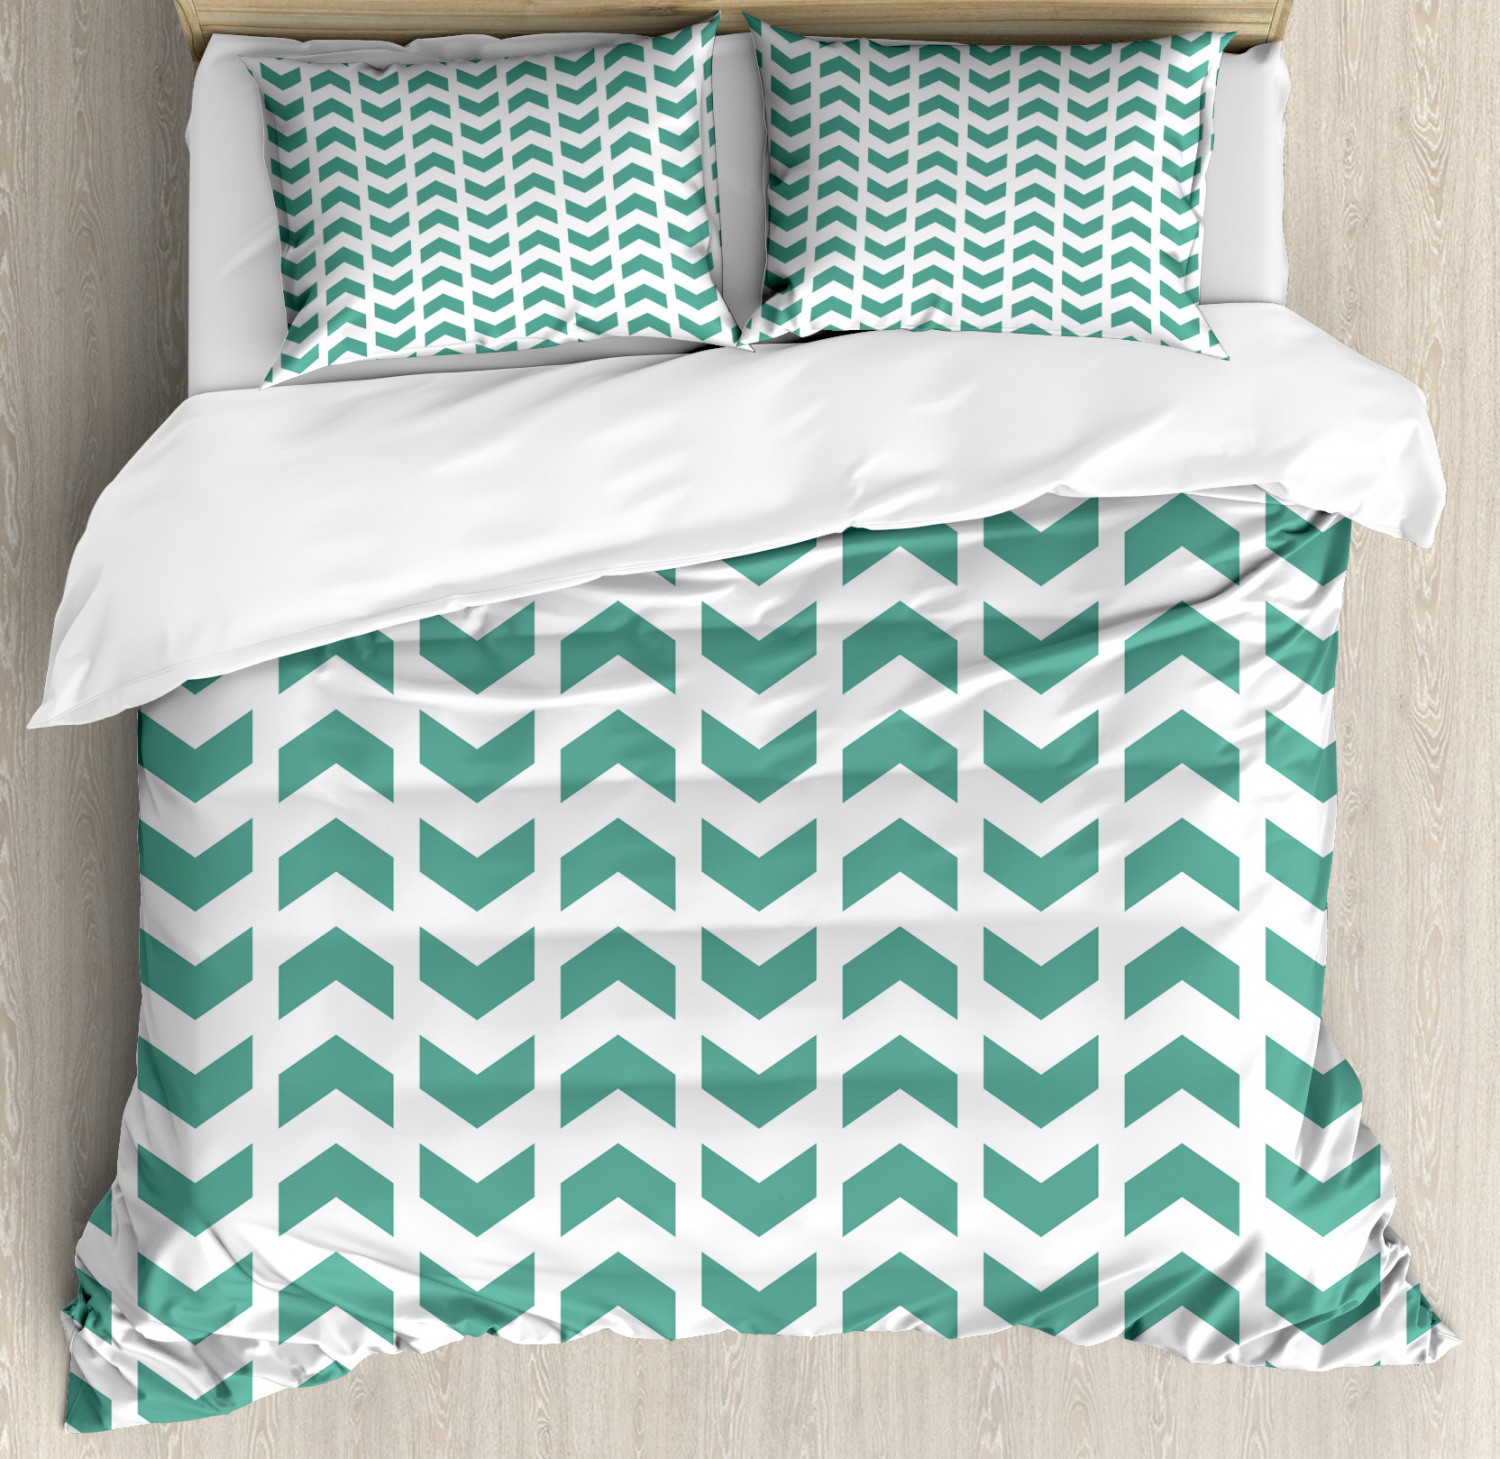 Chevron Duvet Cover Set With Pillow Shams Abstract Zigzag Tribal